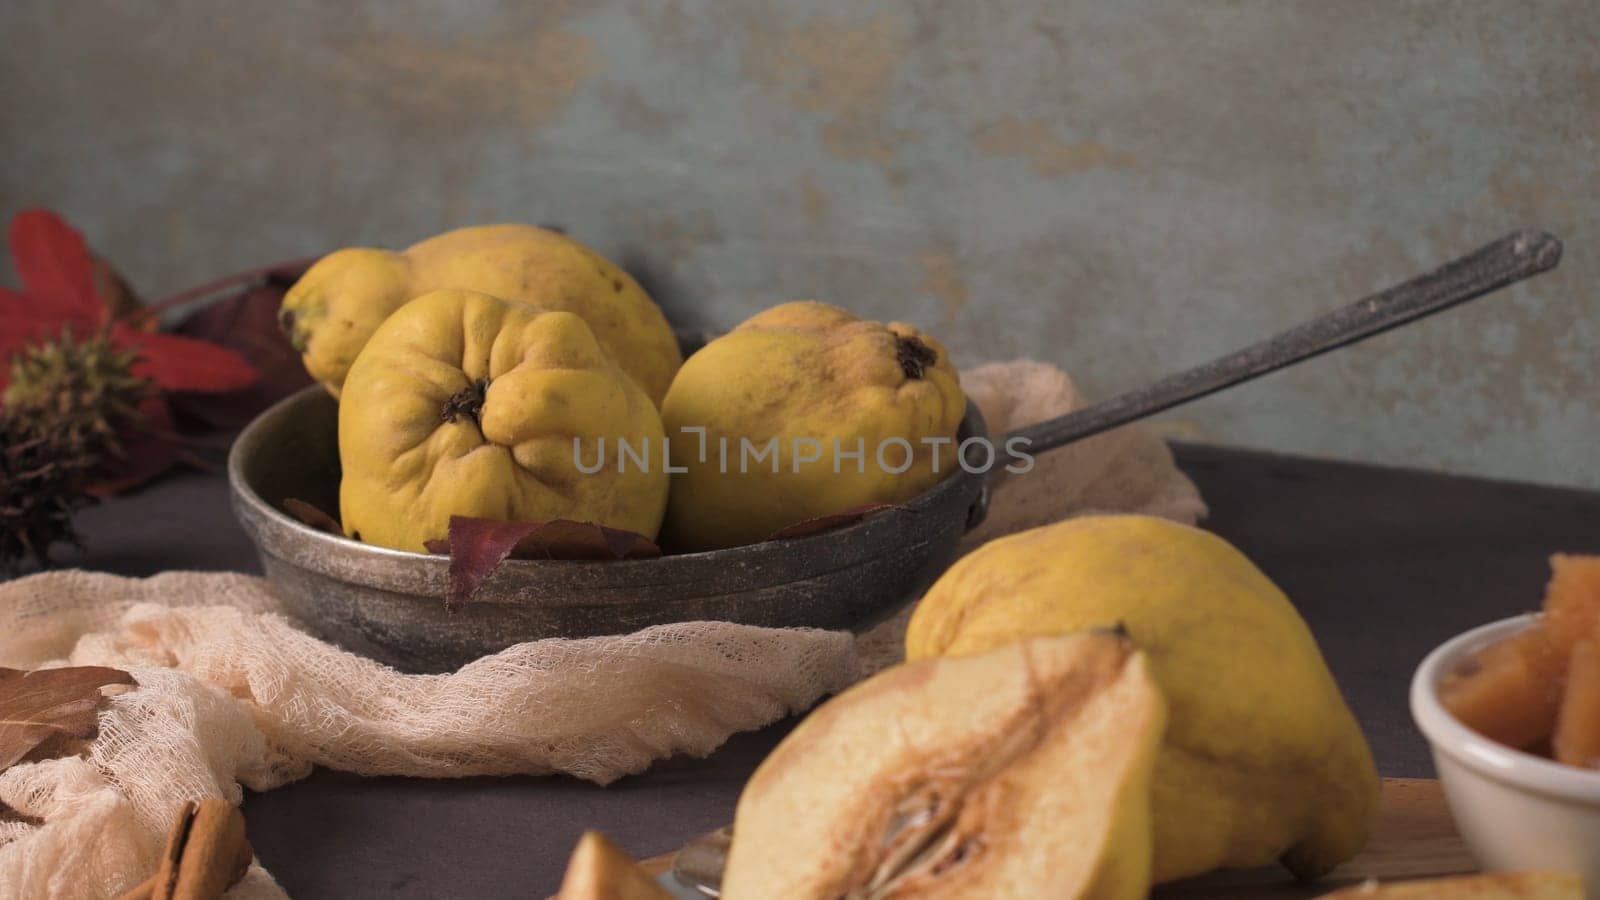 Quince fruits and marmalade by homydesign